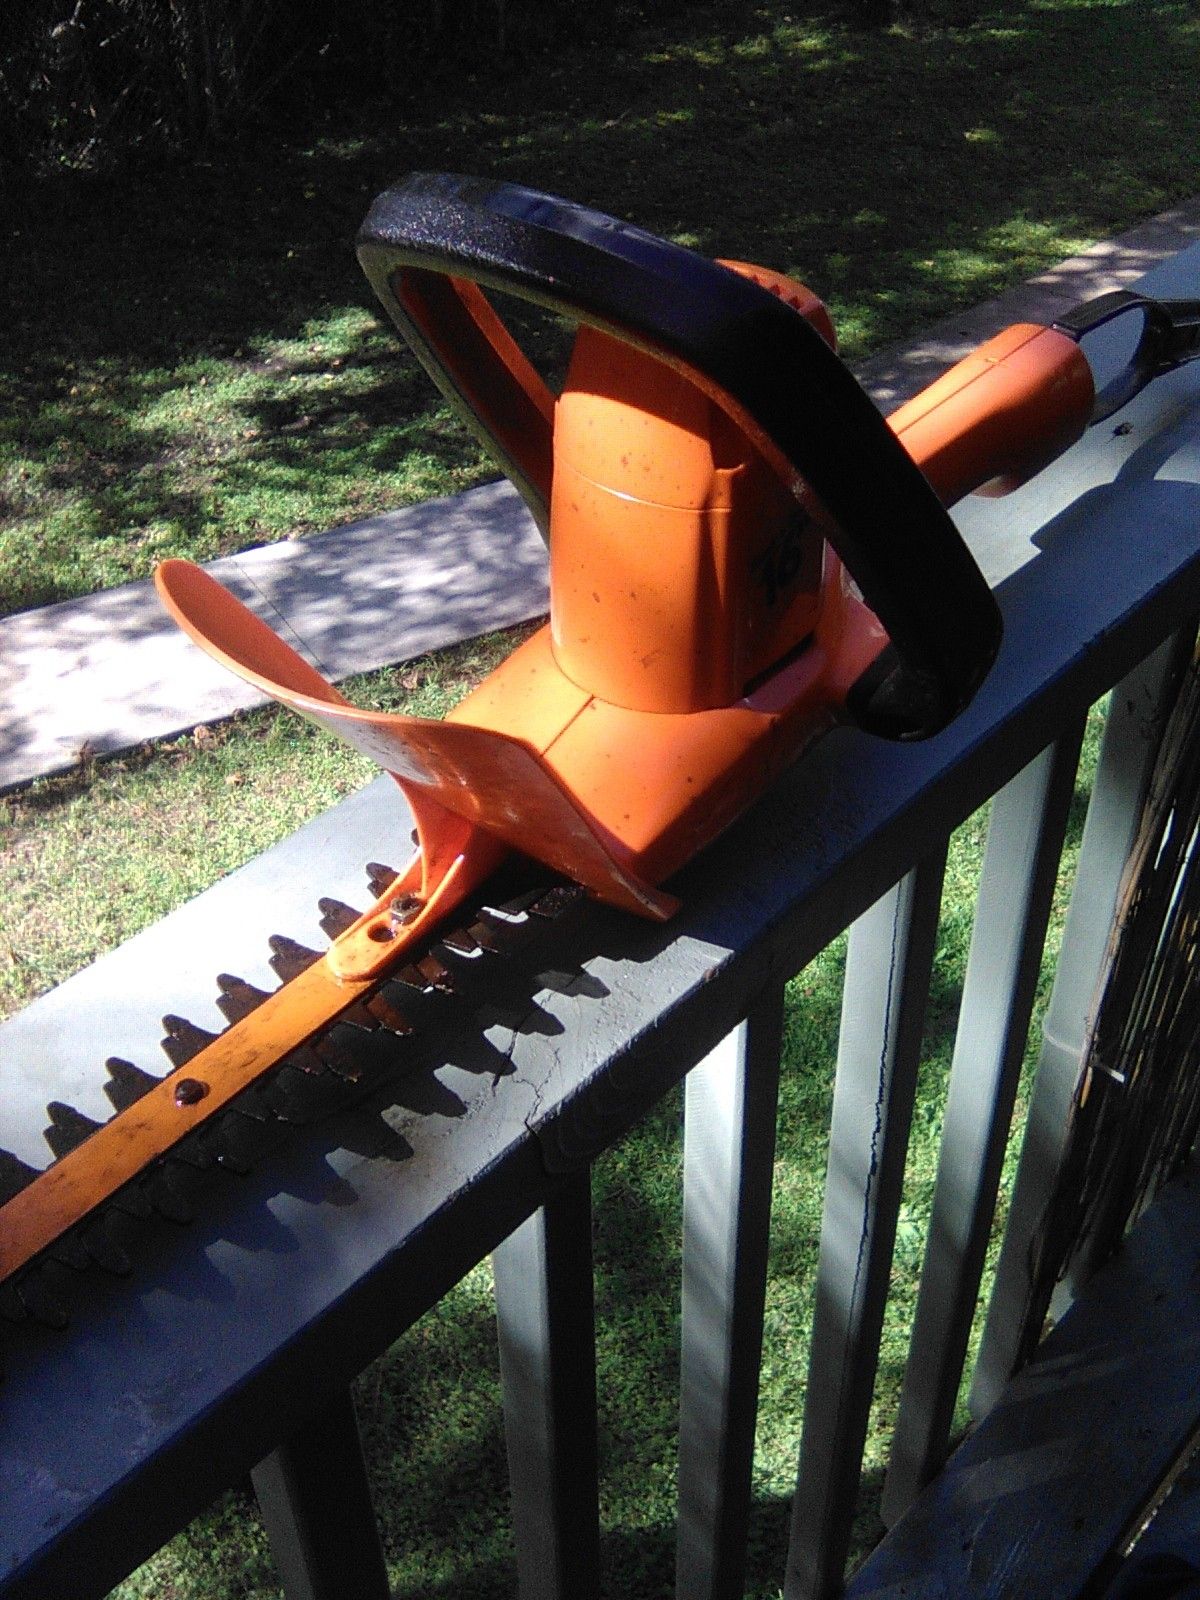 Black & Decker hedge trimmer in good condition works great